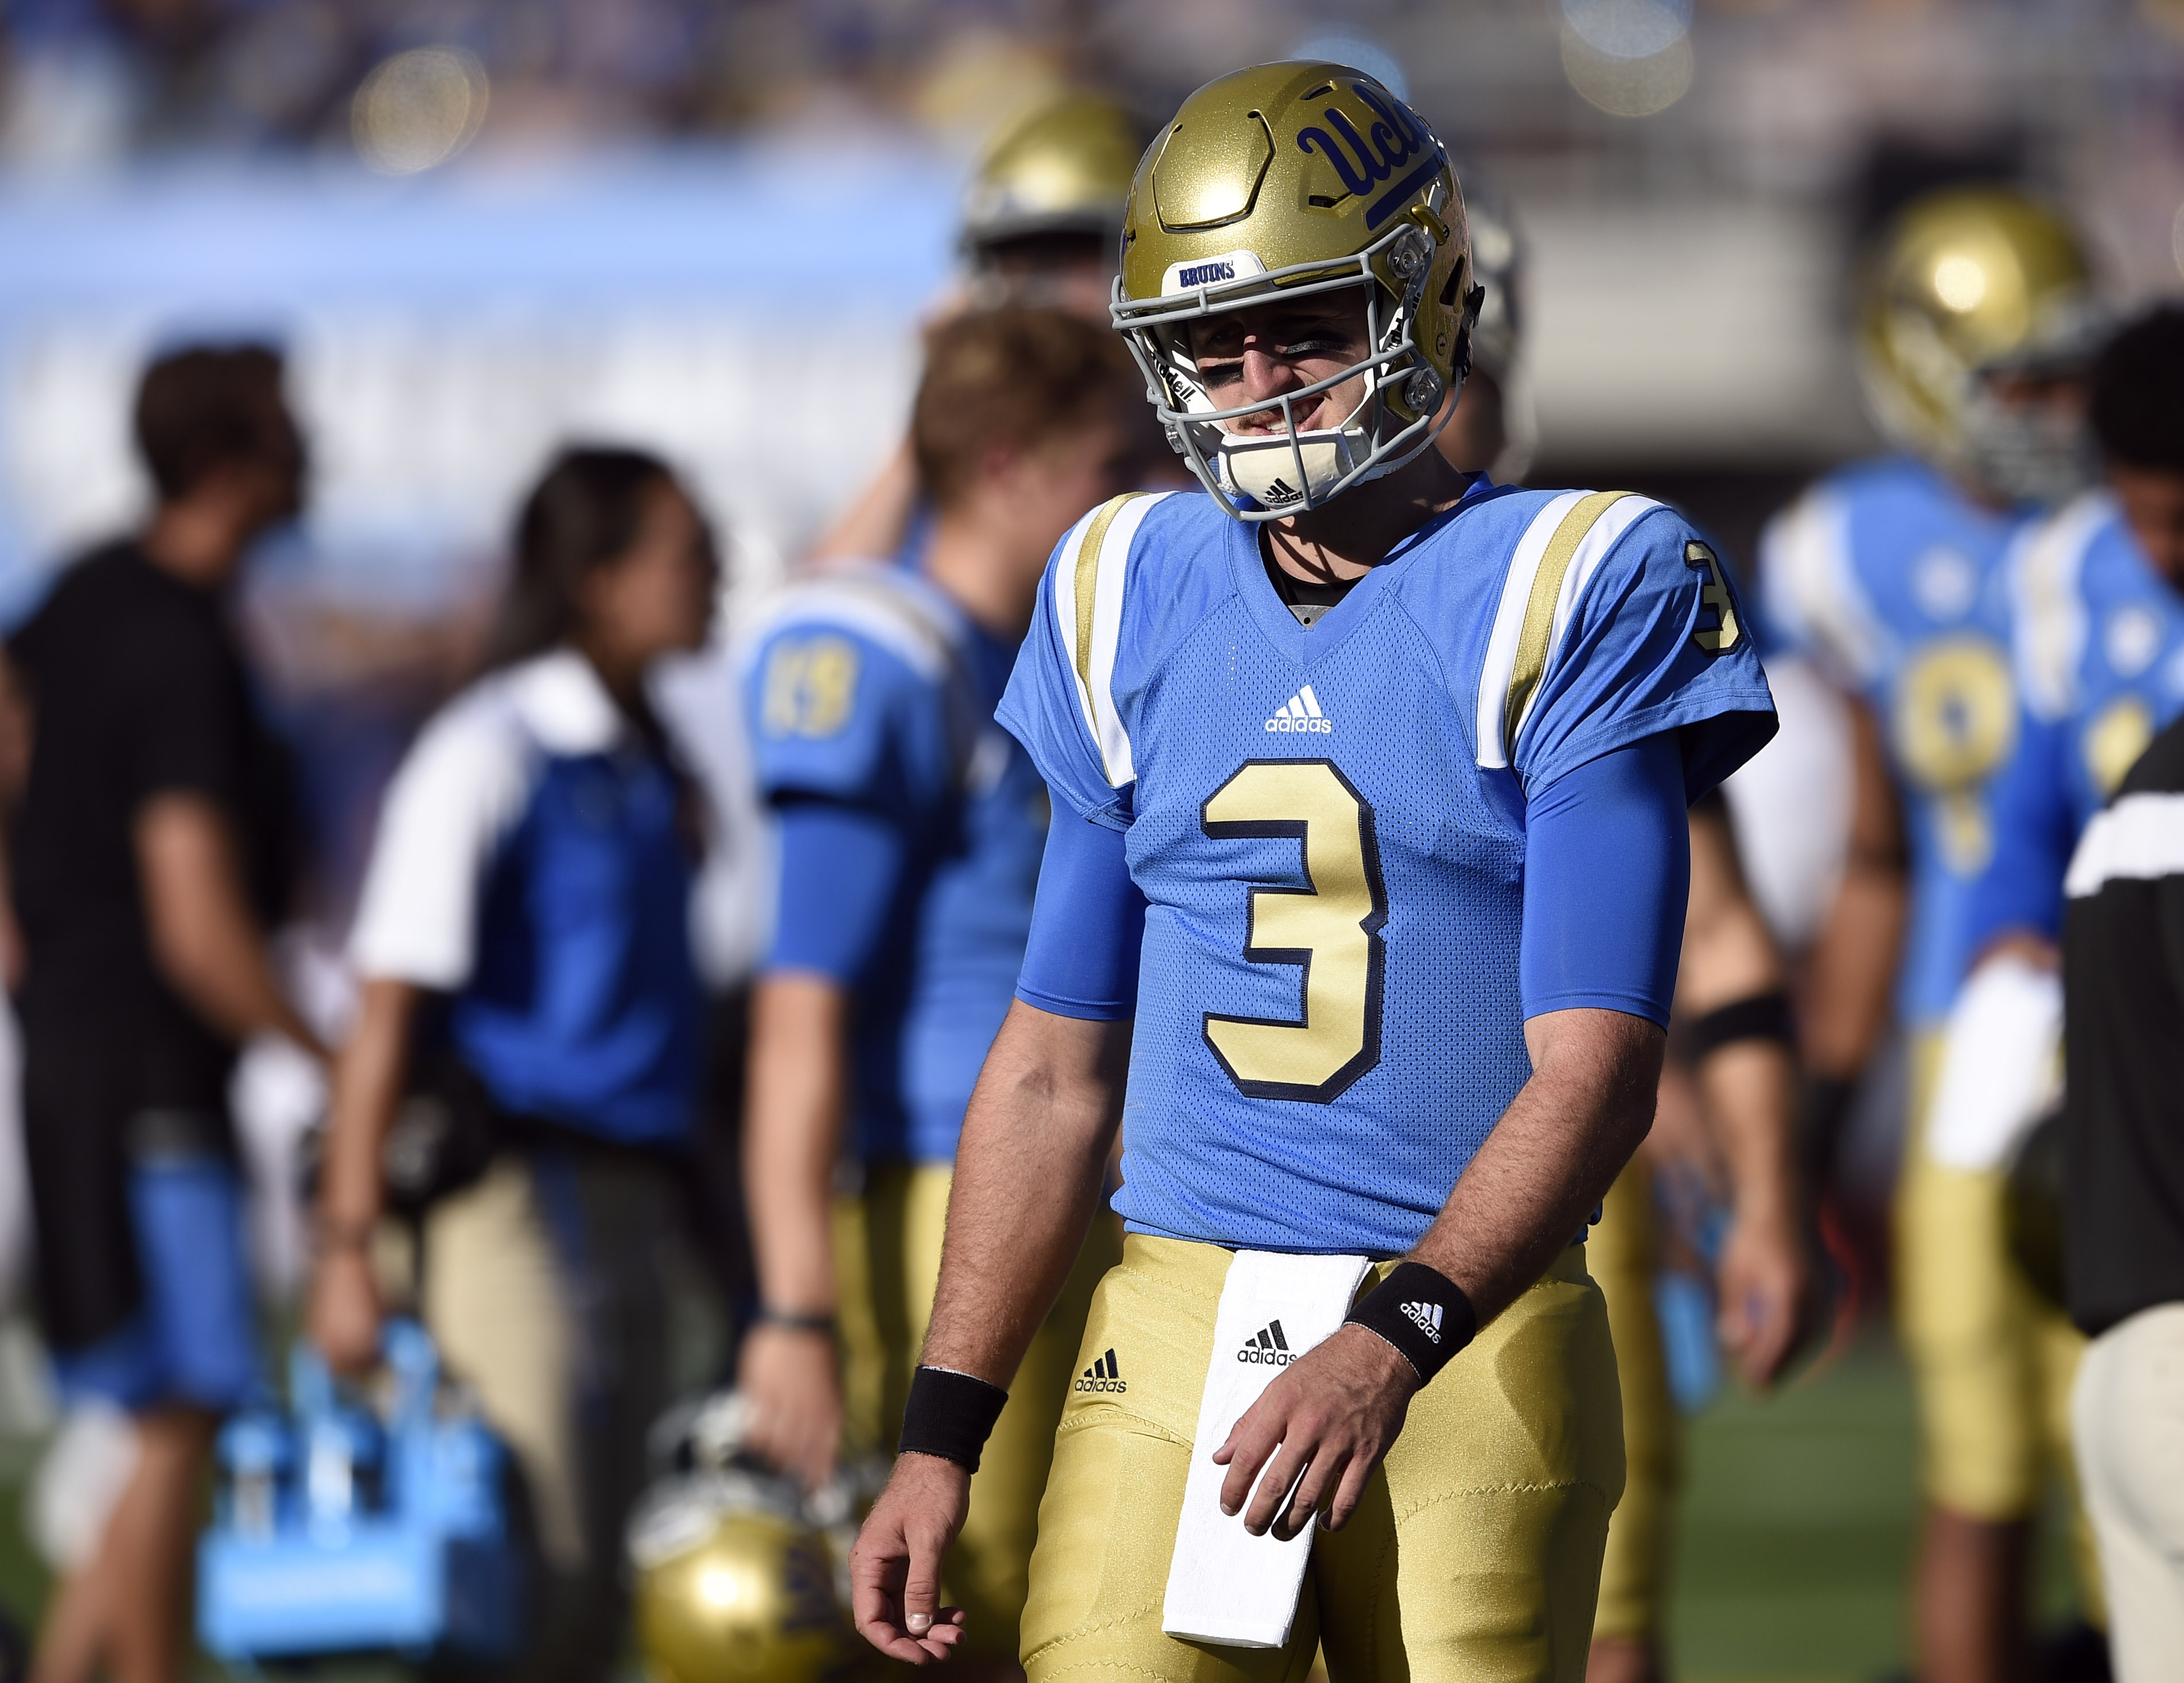 Josh Rosen is 7-11, with 1 TD in the first half against Stanford.